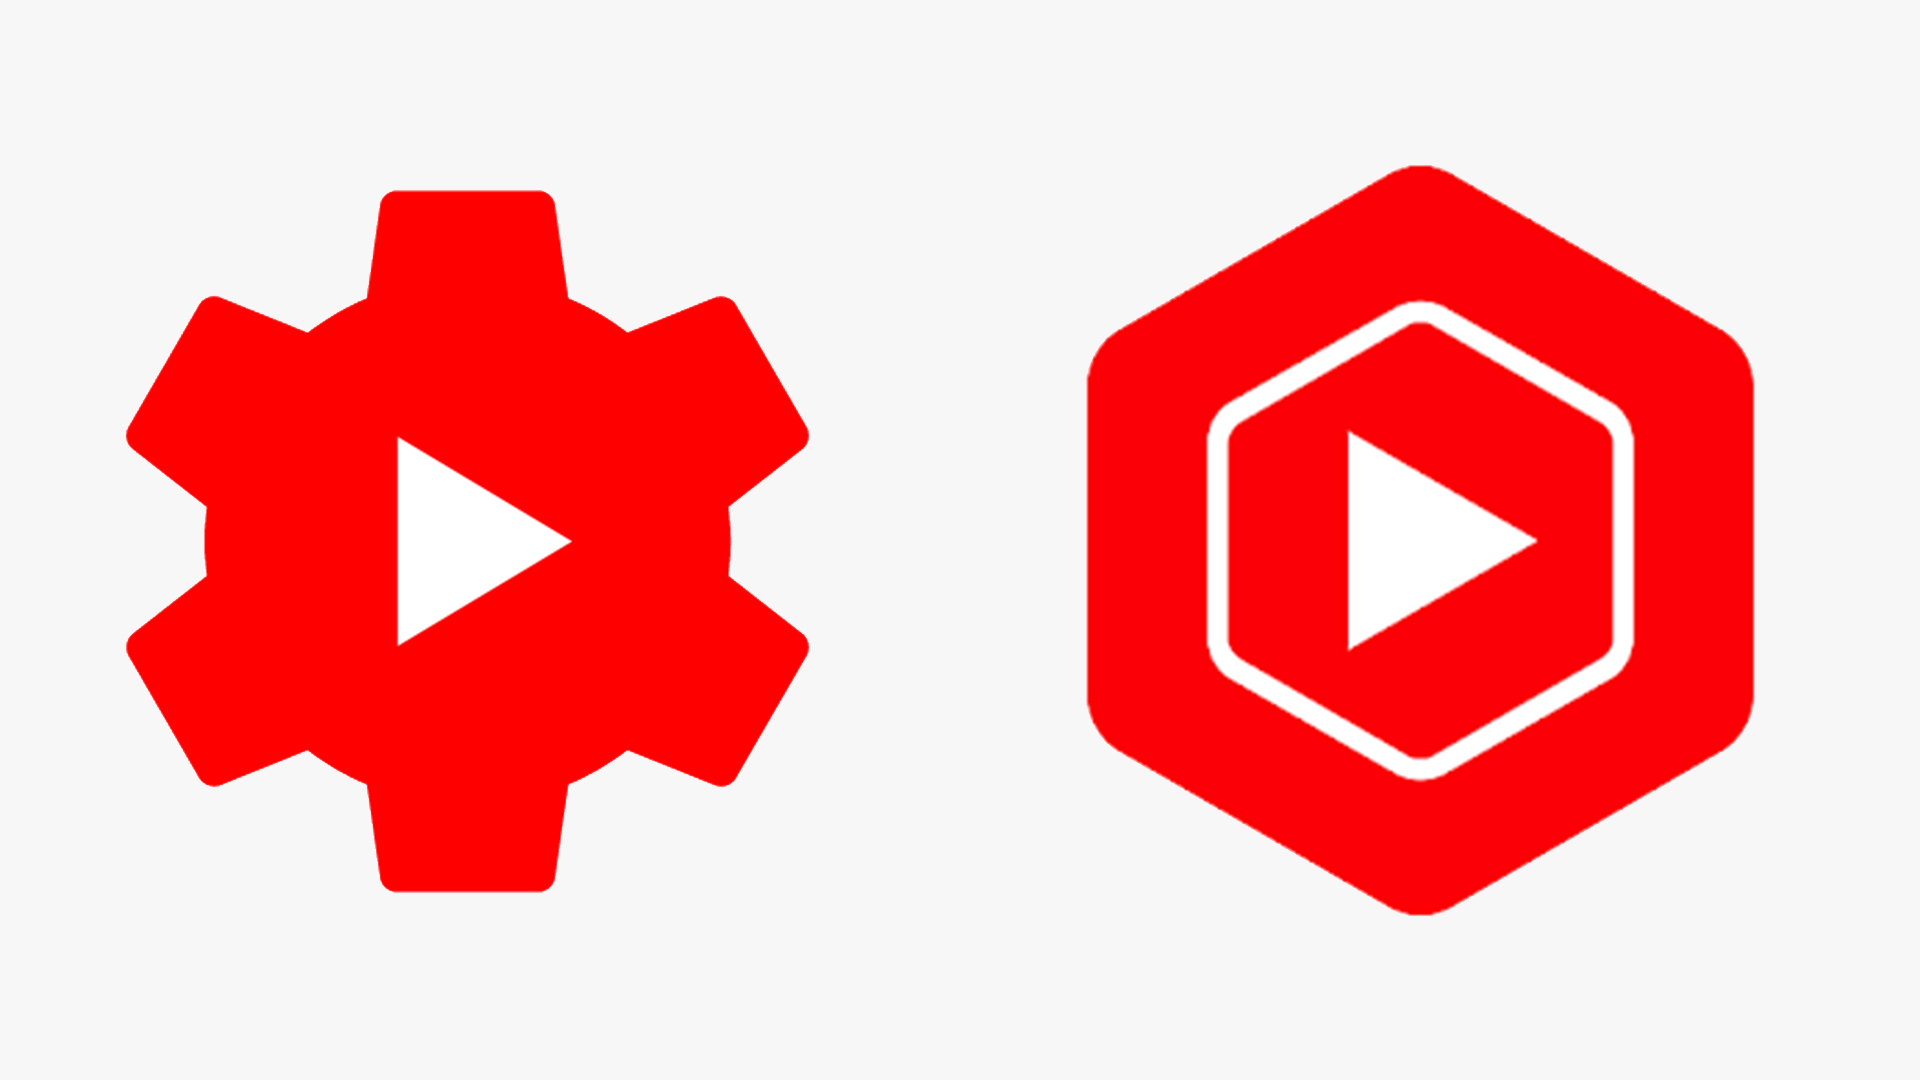 The new YouTube Studio logo is really grinding users' gears